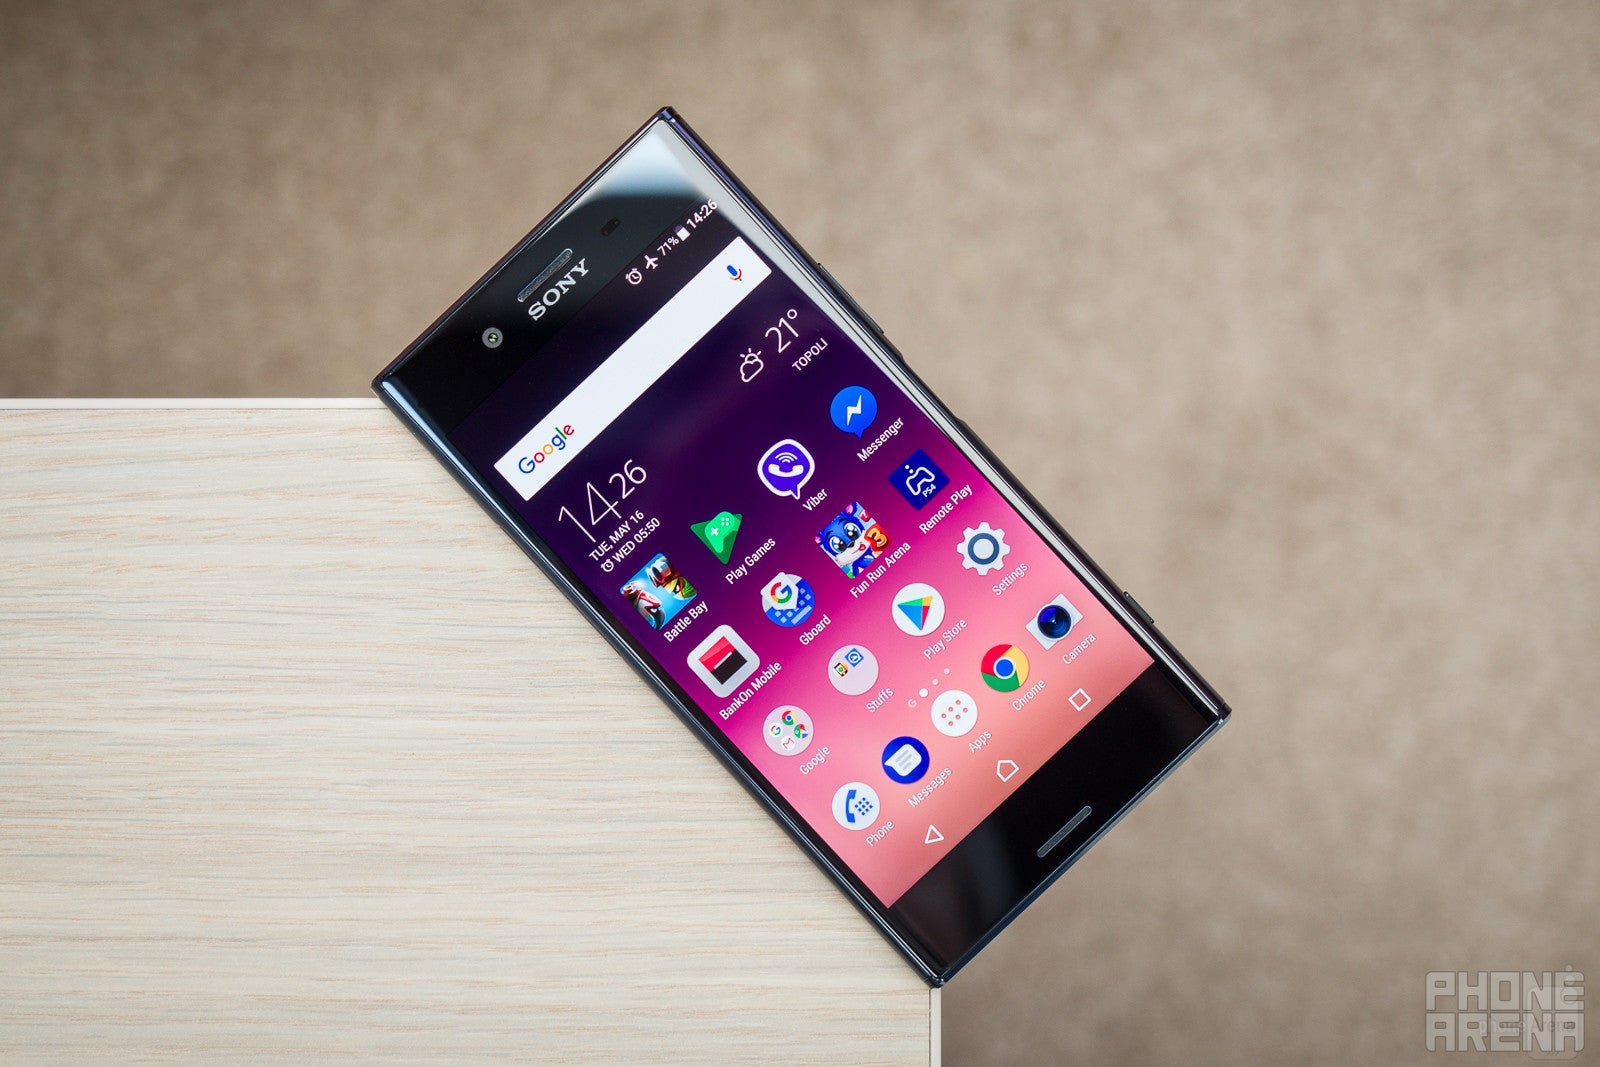 Sony Xperia XZ Pro rumor review: Design, specs, features, price and release date